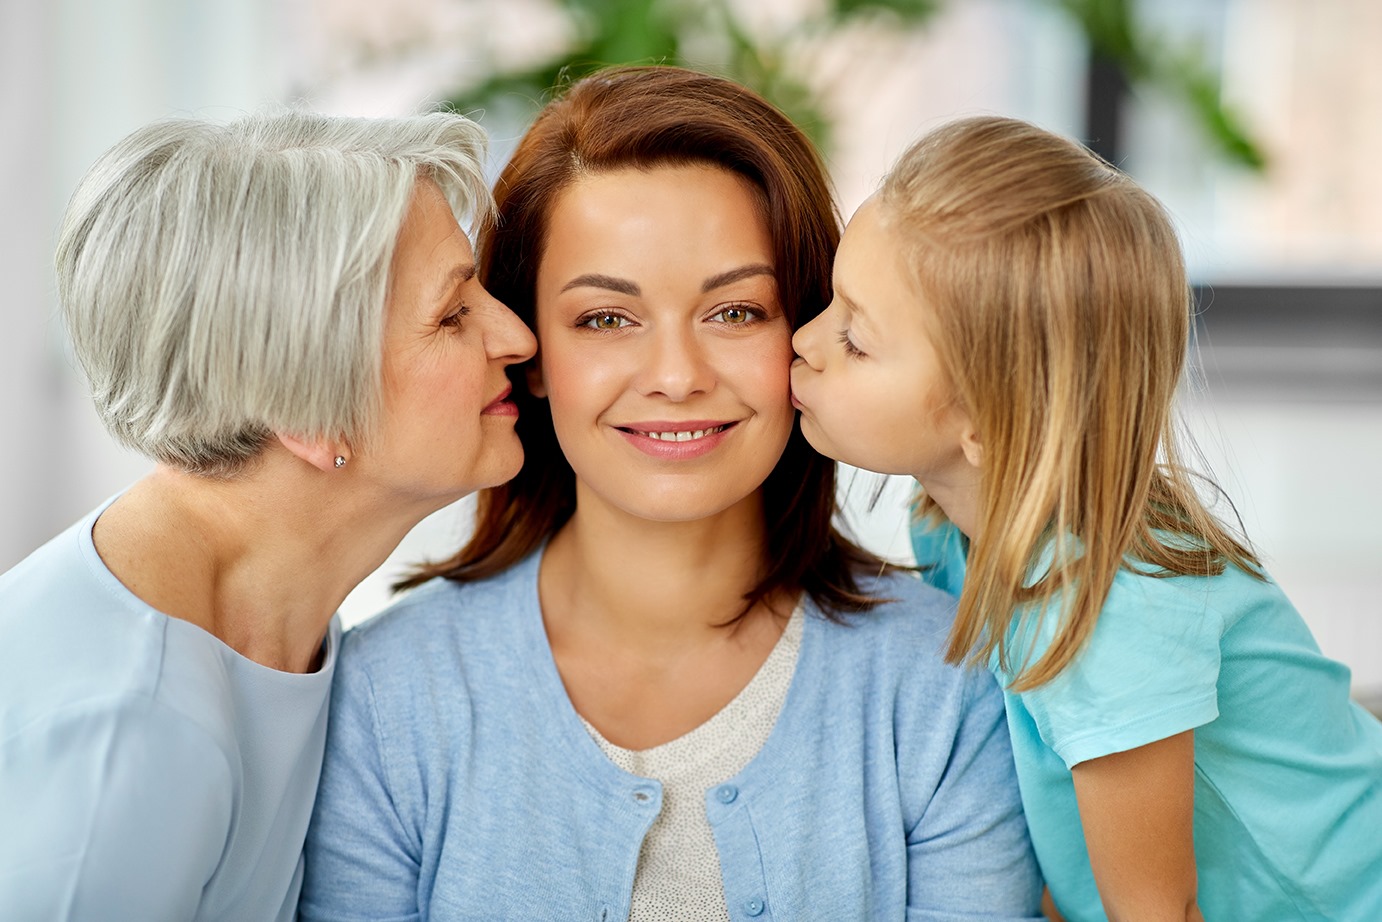 A caregiver being kissed on the cheek by her child and older loved one